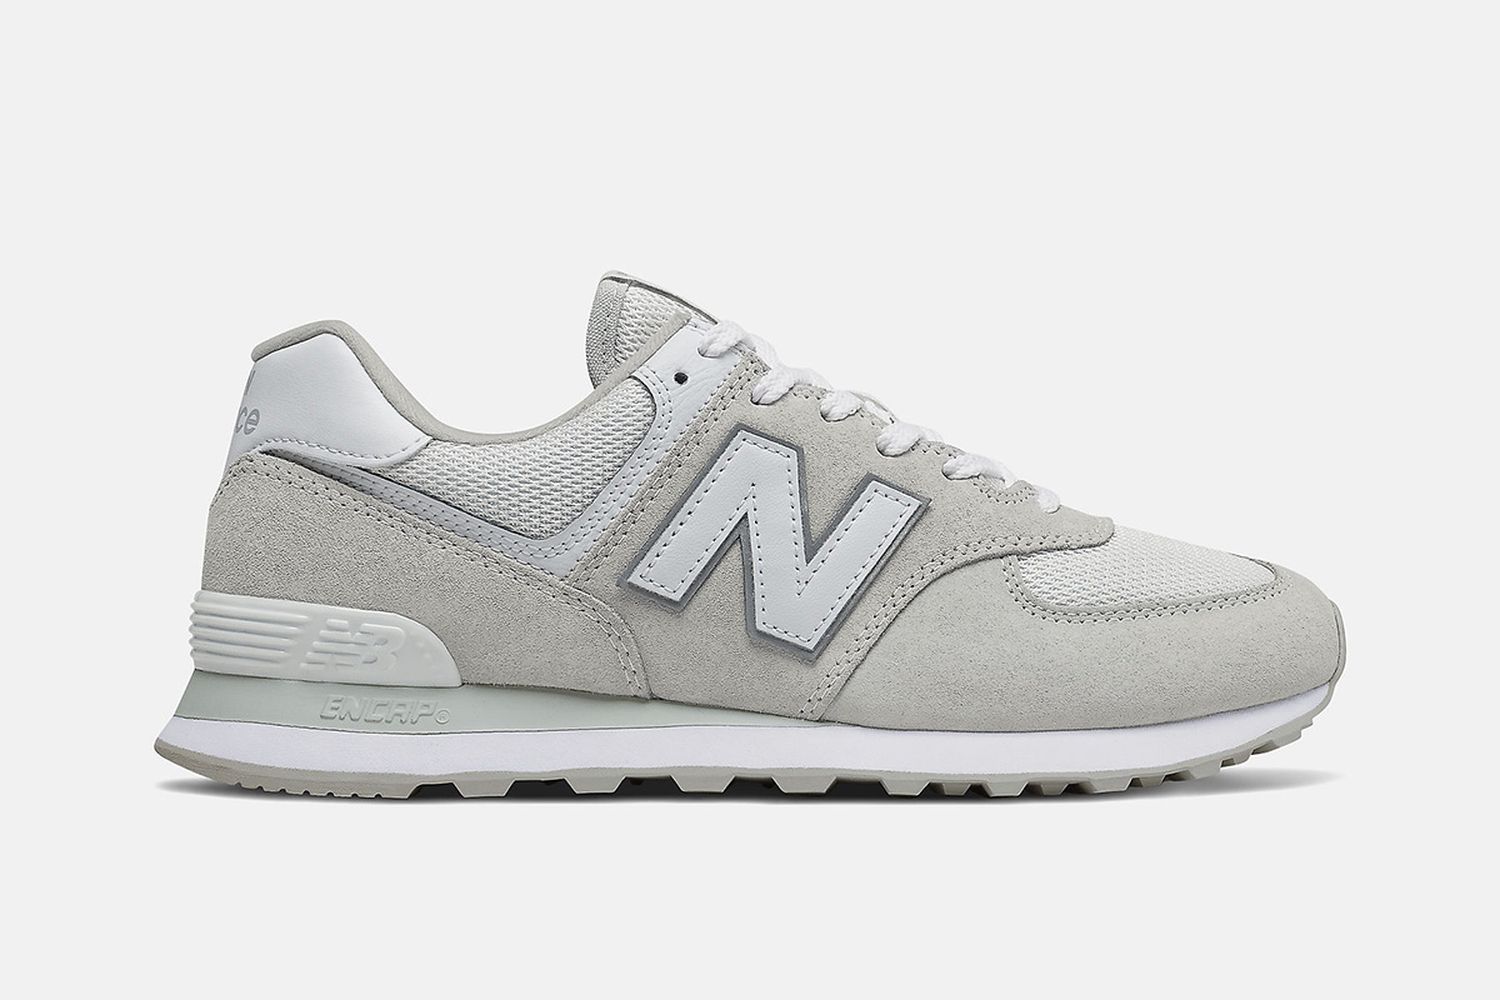 Shop the Best New Balance 574 Colorways Here